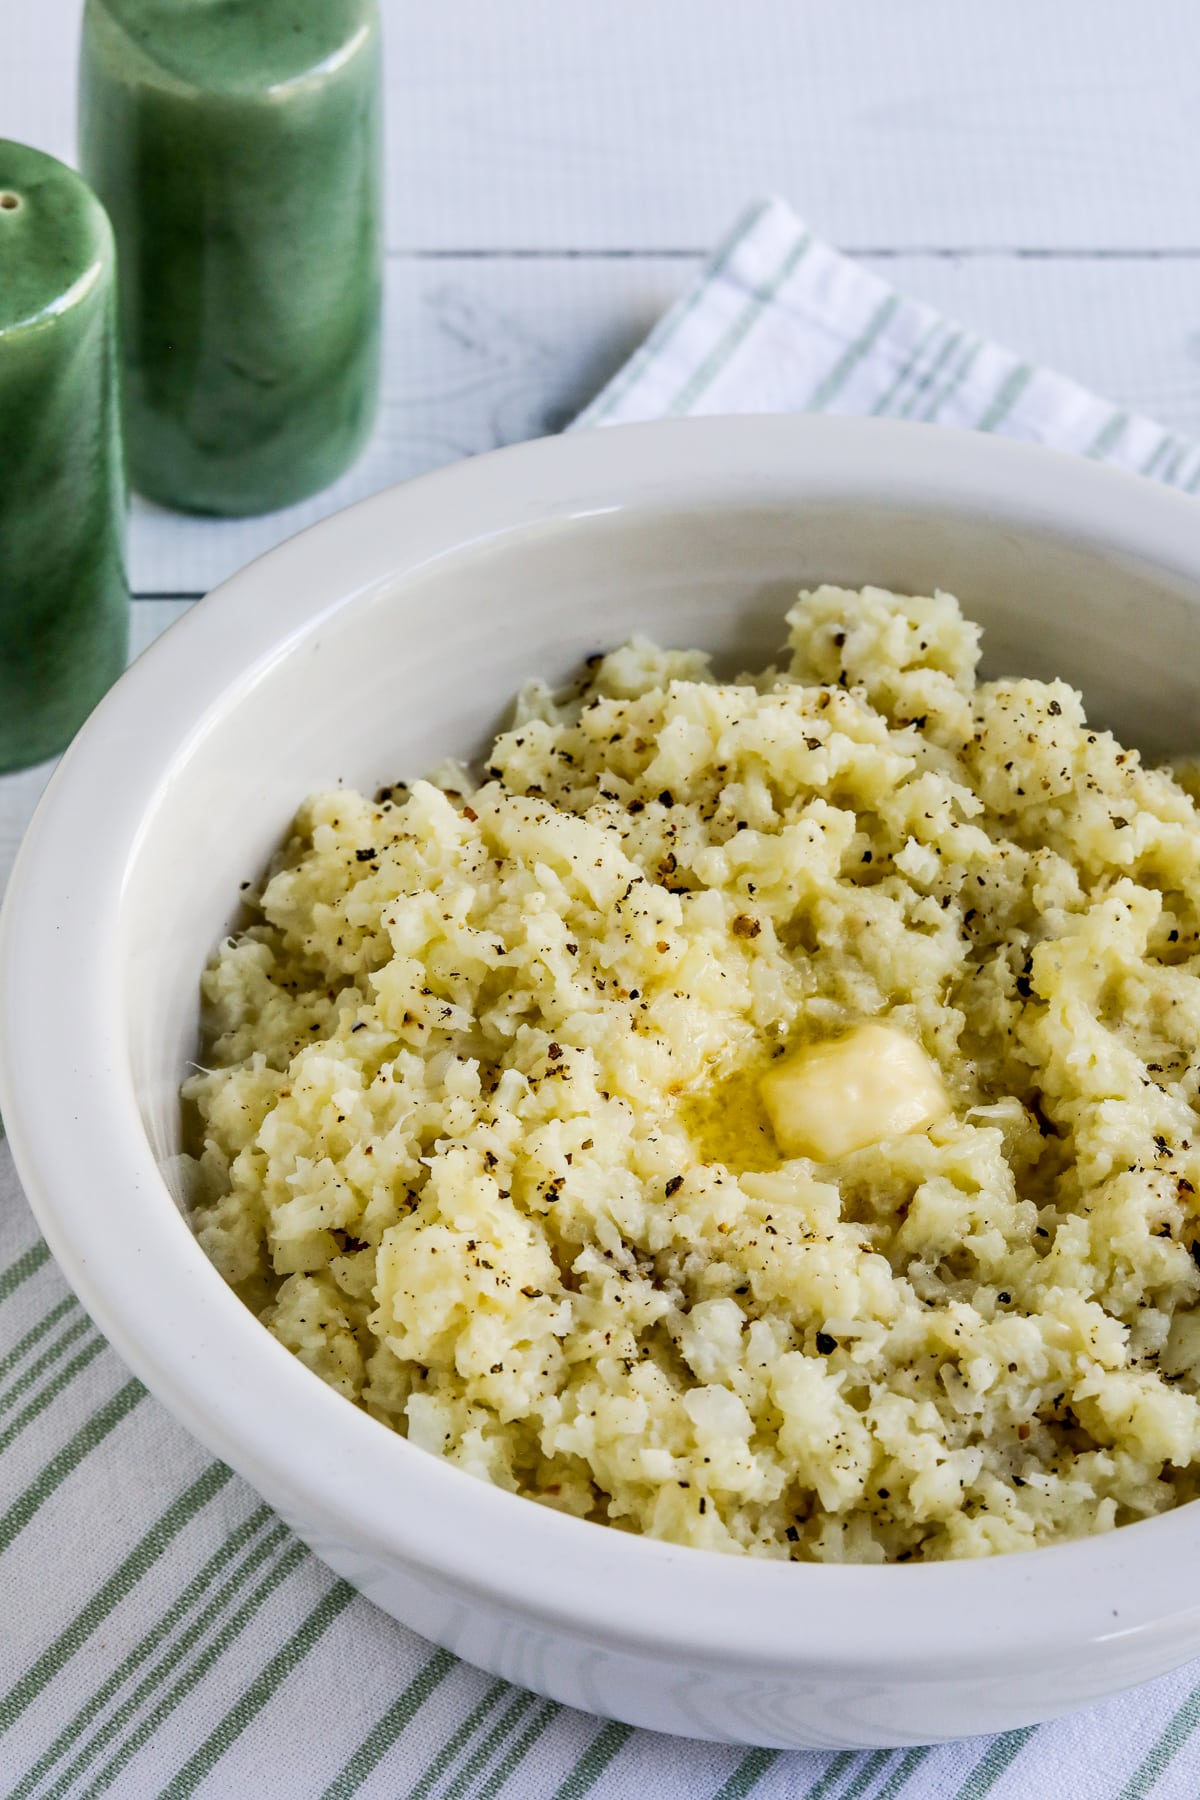 Pureed Cauliflower with Garlic, Parmesan, and Goat Cheese shown in bowl with spoon and salt-pepper shakers.